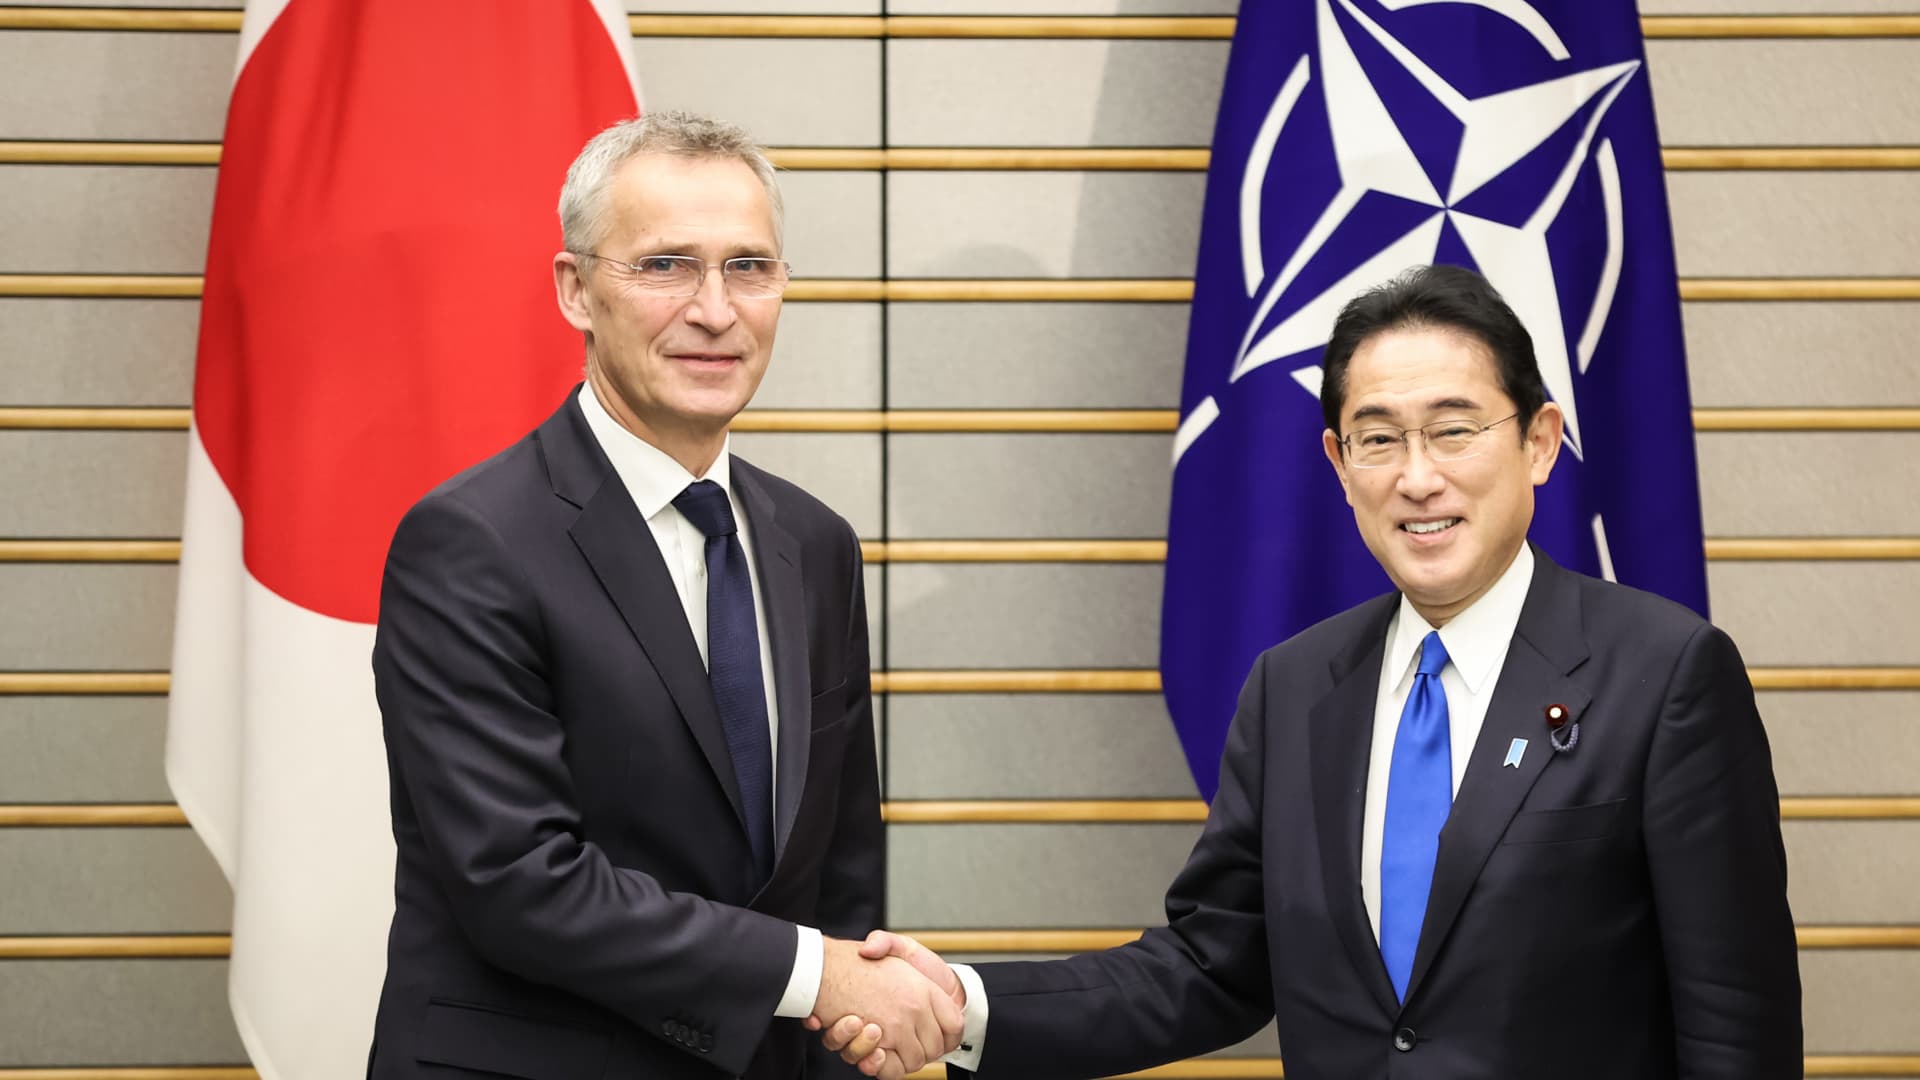 General Jens Stoltenberg (left) shakes hands with Japanese Prime Minister Fumio Kishida (right) on Jan. 31, 2023 in Tokyo, Japan. Stoltenberg visits Japan to strengthen bilateral ties between the country and the E.U.